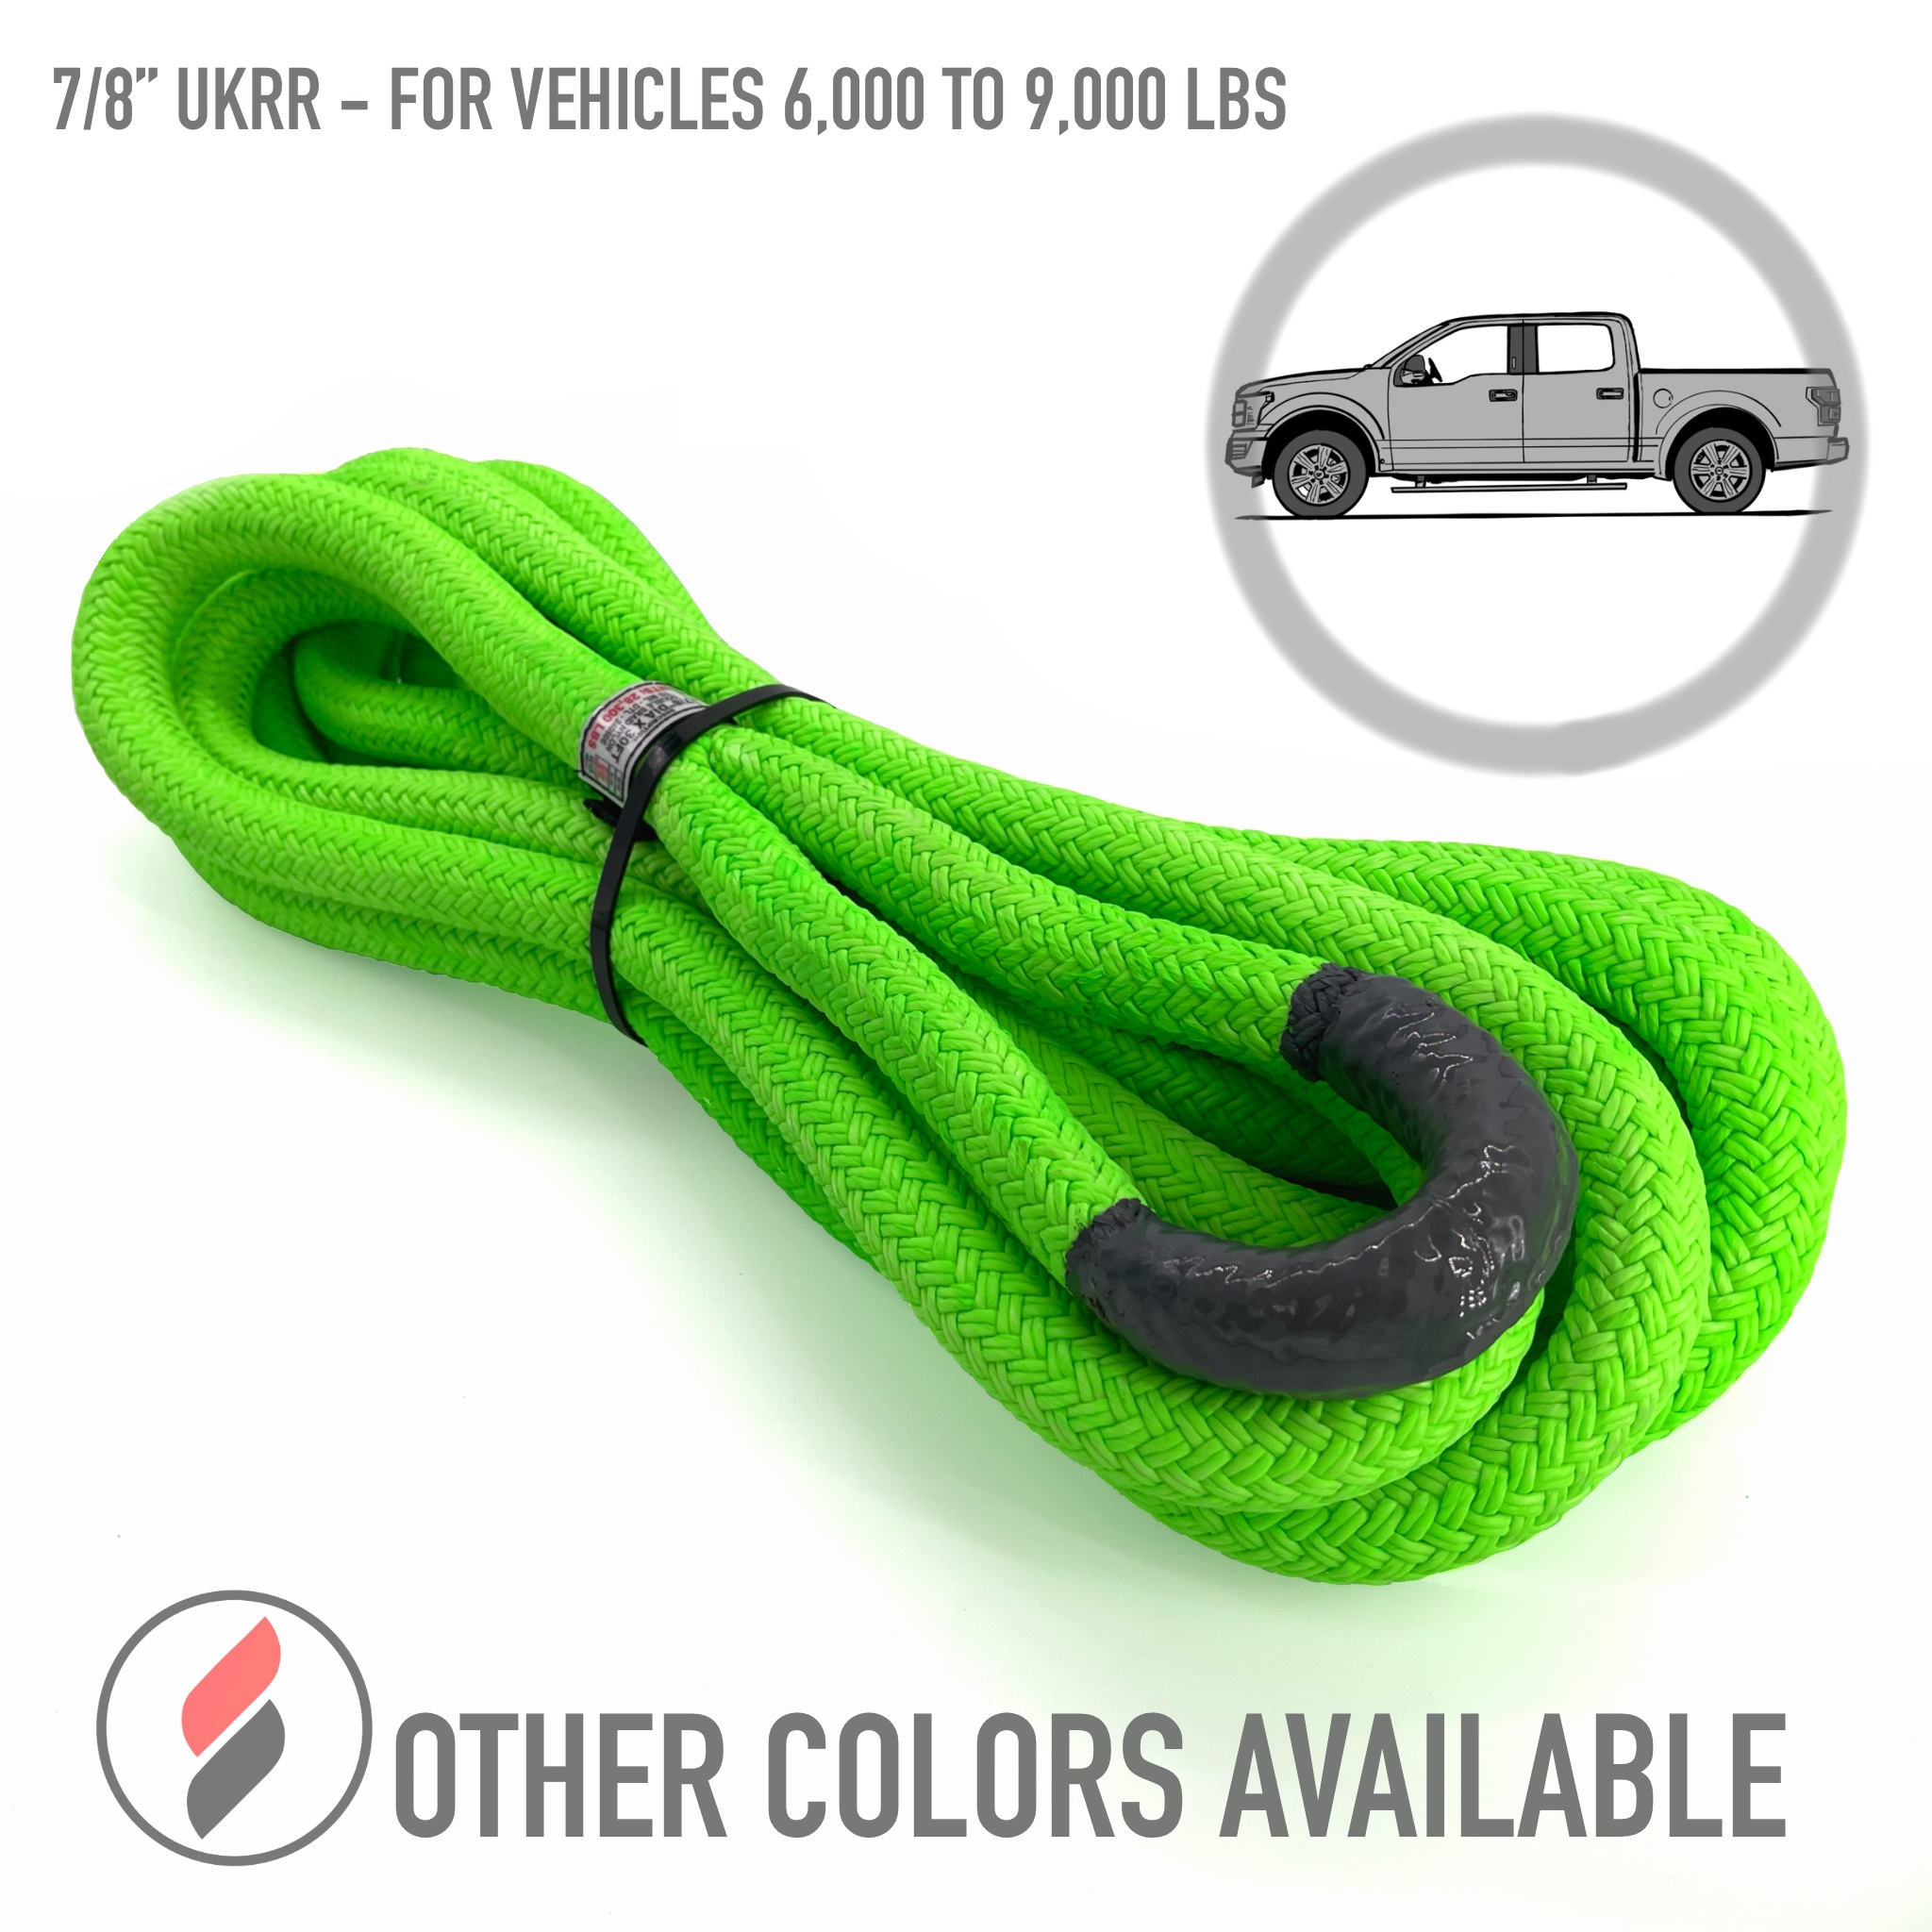 30000 lbs EXCELFU 7/8 x 30 Kinetic Recovery Rope Tow Rope SUV Jeep UTV Heavy Duty Double Nylon Braided Kinetic Energy Recovery Rope for 4x4 ATV Truck 